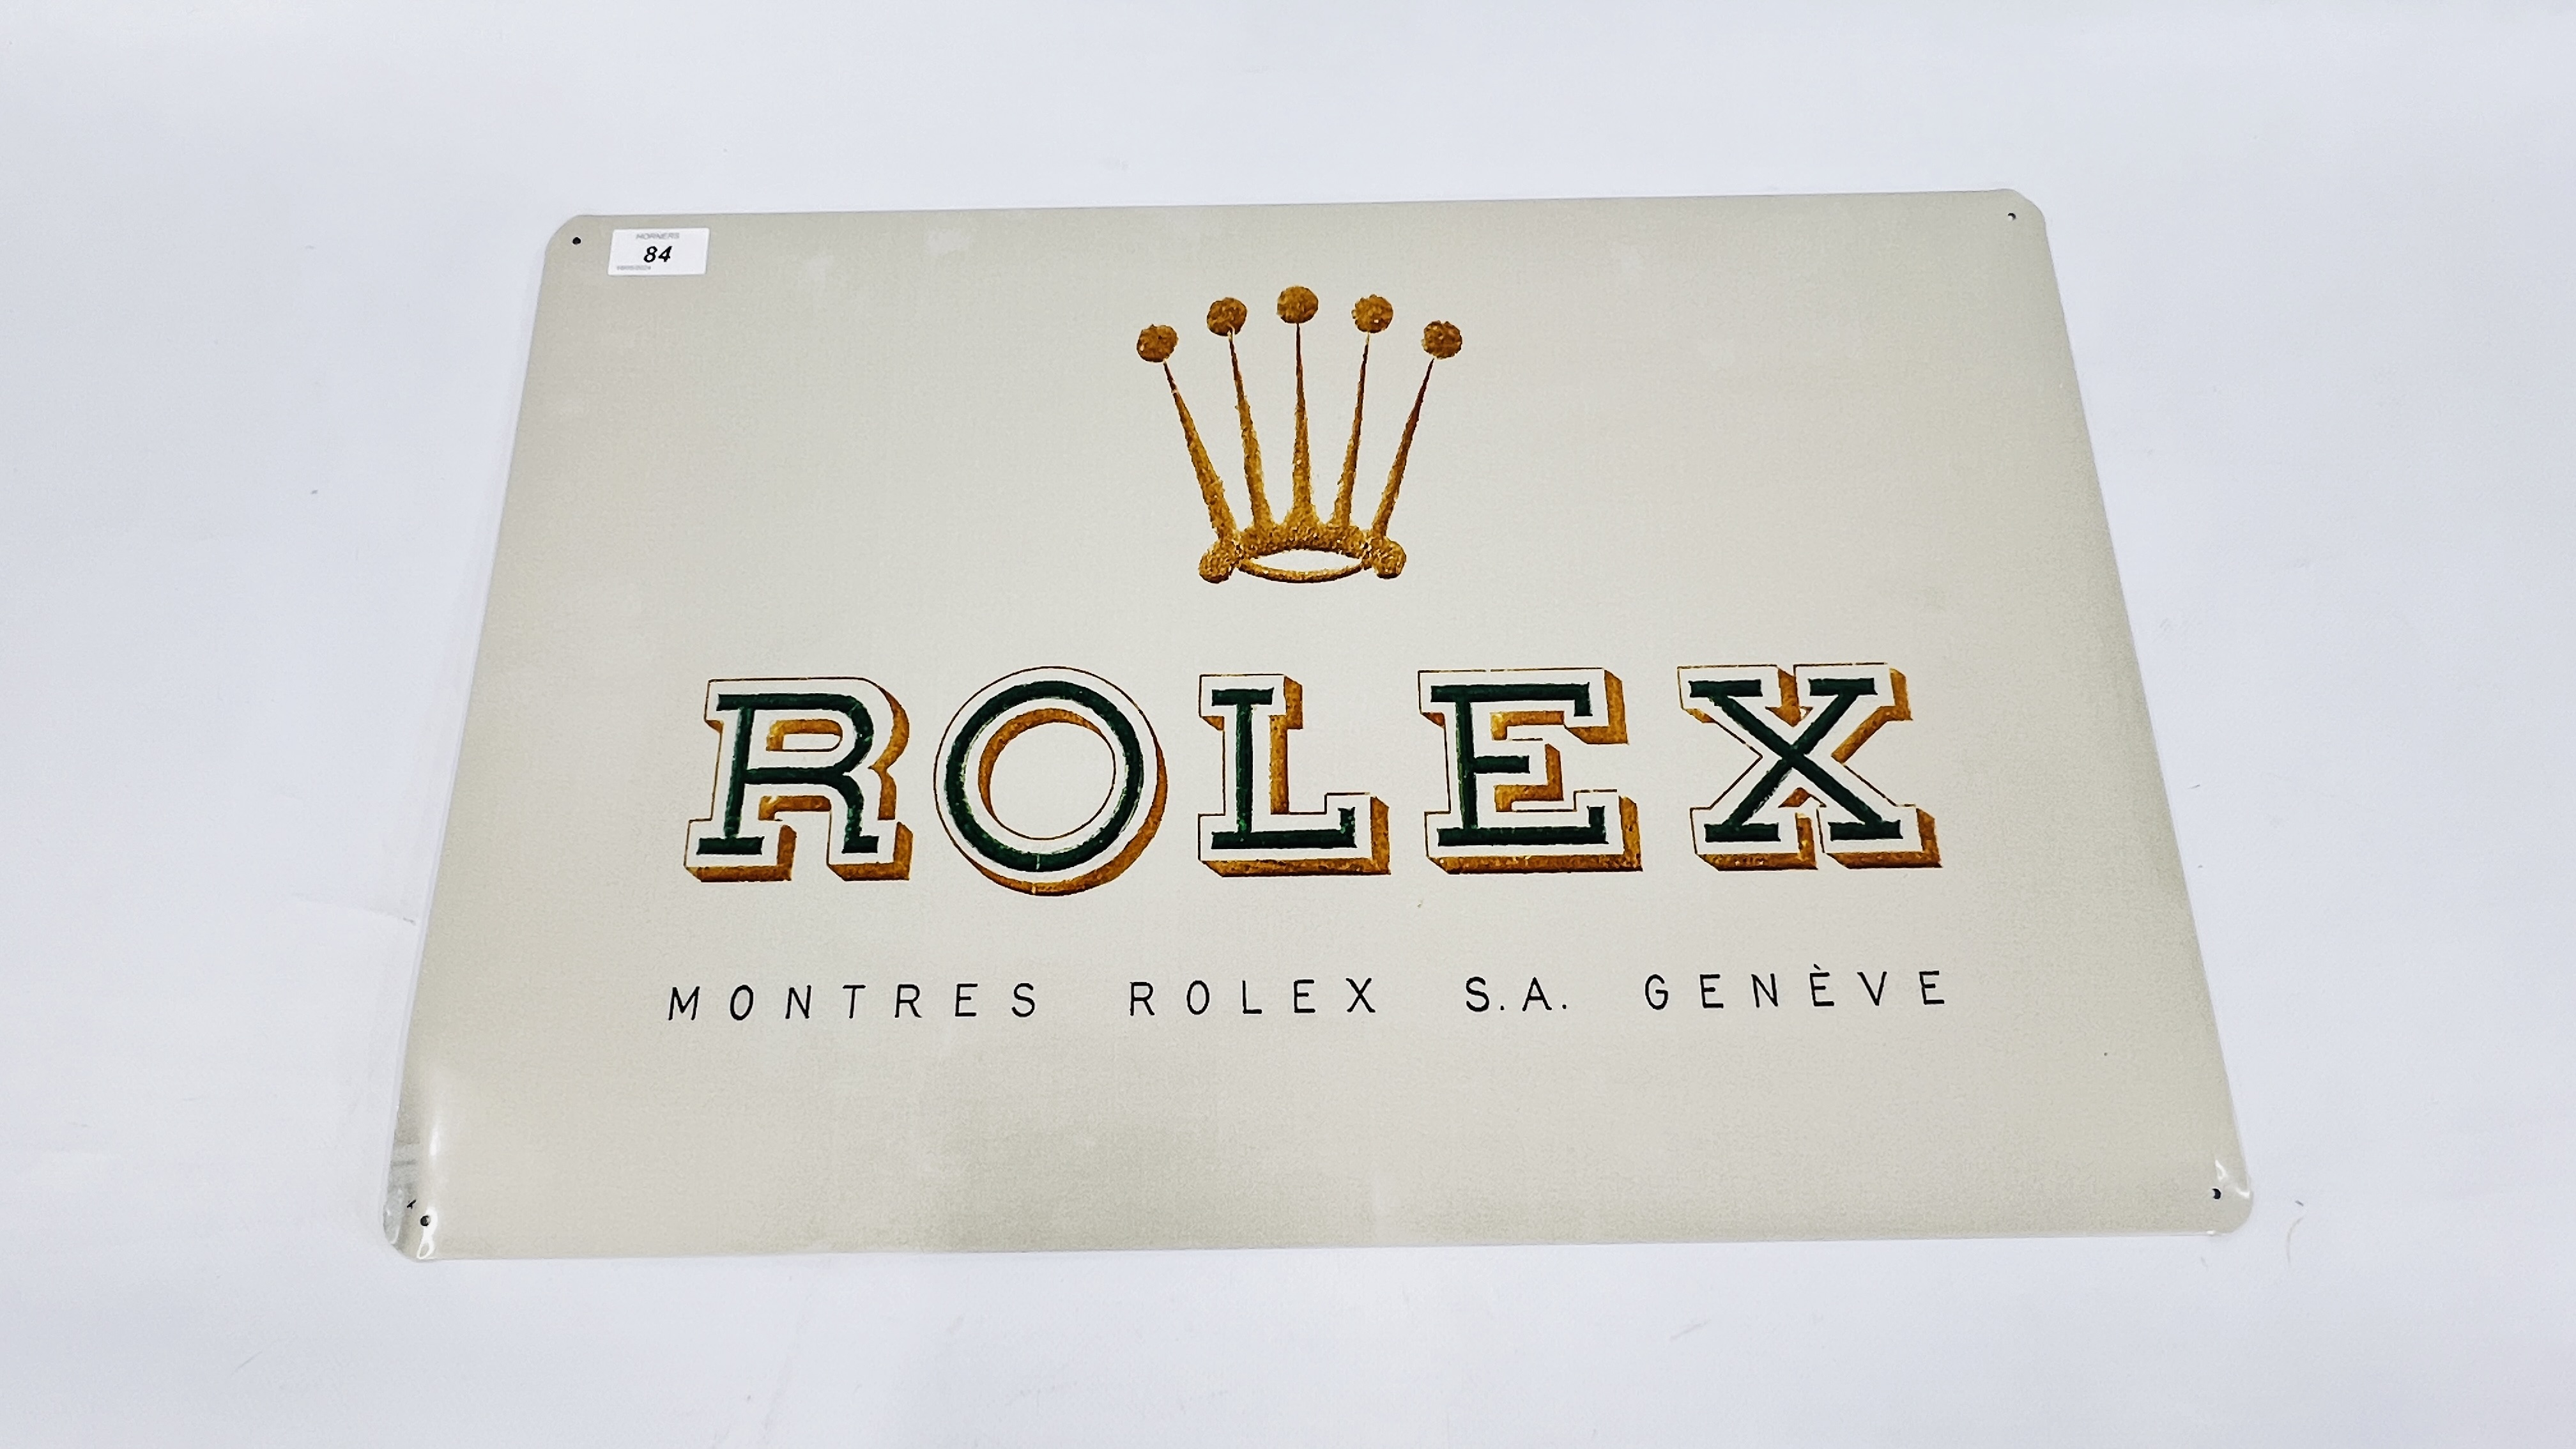 A REPRODUCTION TIN "ROLEX" ADVERTISING SIGN W 60 X H 40CM.